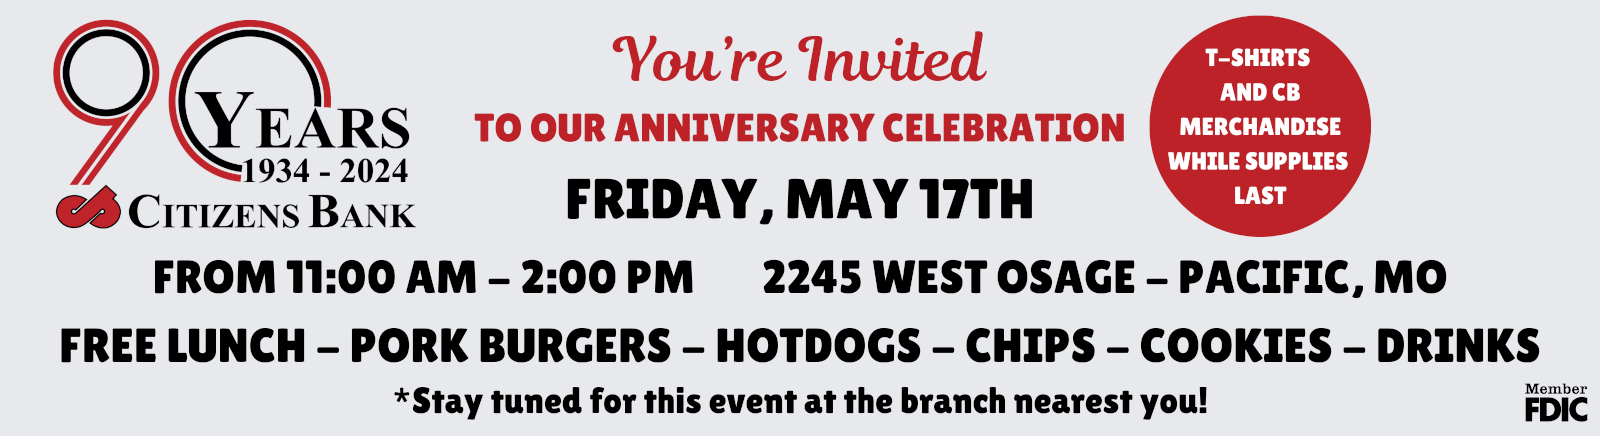 90 YEARS 1934 - 2024 CITIZENS BANK YOU'RE INVITED TO OUR ANNIVERSARY CELEBRATION FRIDAY, MAY 17TH FROM 11AM - 2PM 2245 WEST OSAGE - PACIFIC, MO FREE LUNCH - PORK BURGERS - HOTDOGS - CHIPS - COOKIES - DRINKS - T-SHIRTS AND CB MERCHANDISE WHILE SUPPLIES LAST *STAY TUNED FOR THIS EVENT AT THE BRANCH NEAREST YOU!